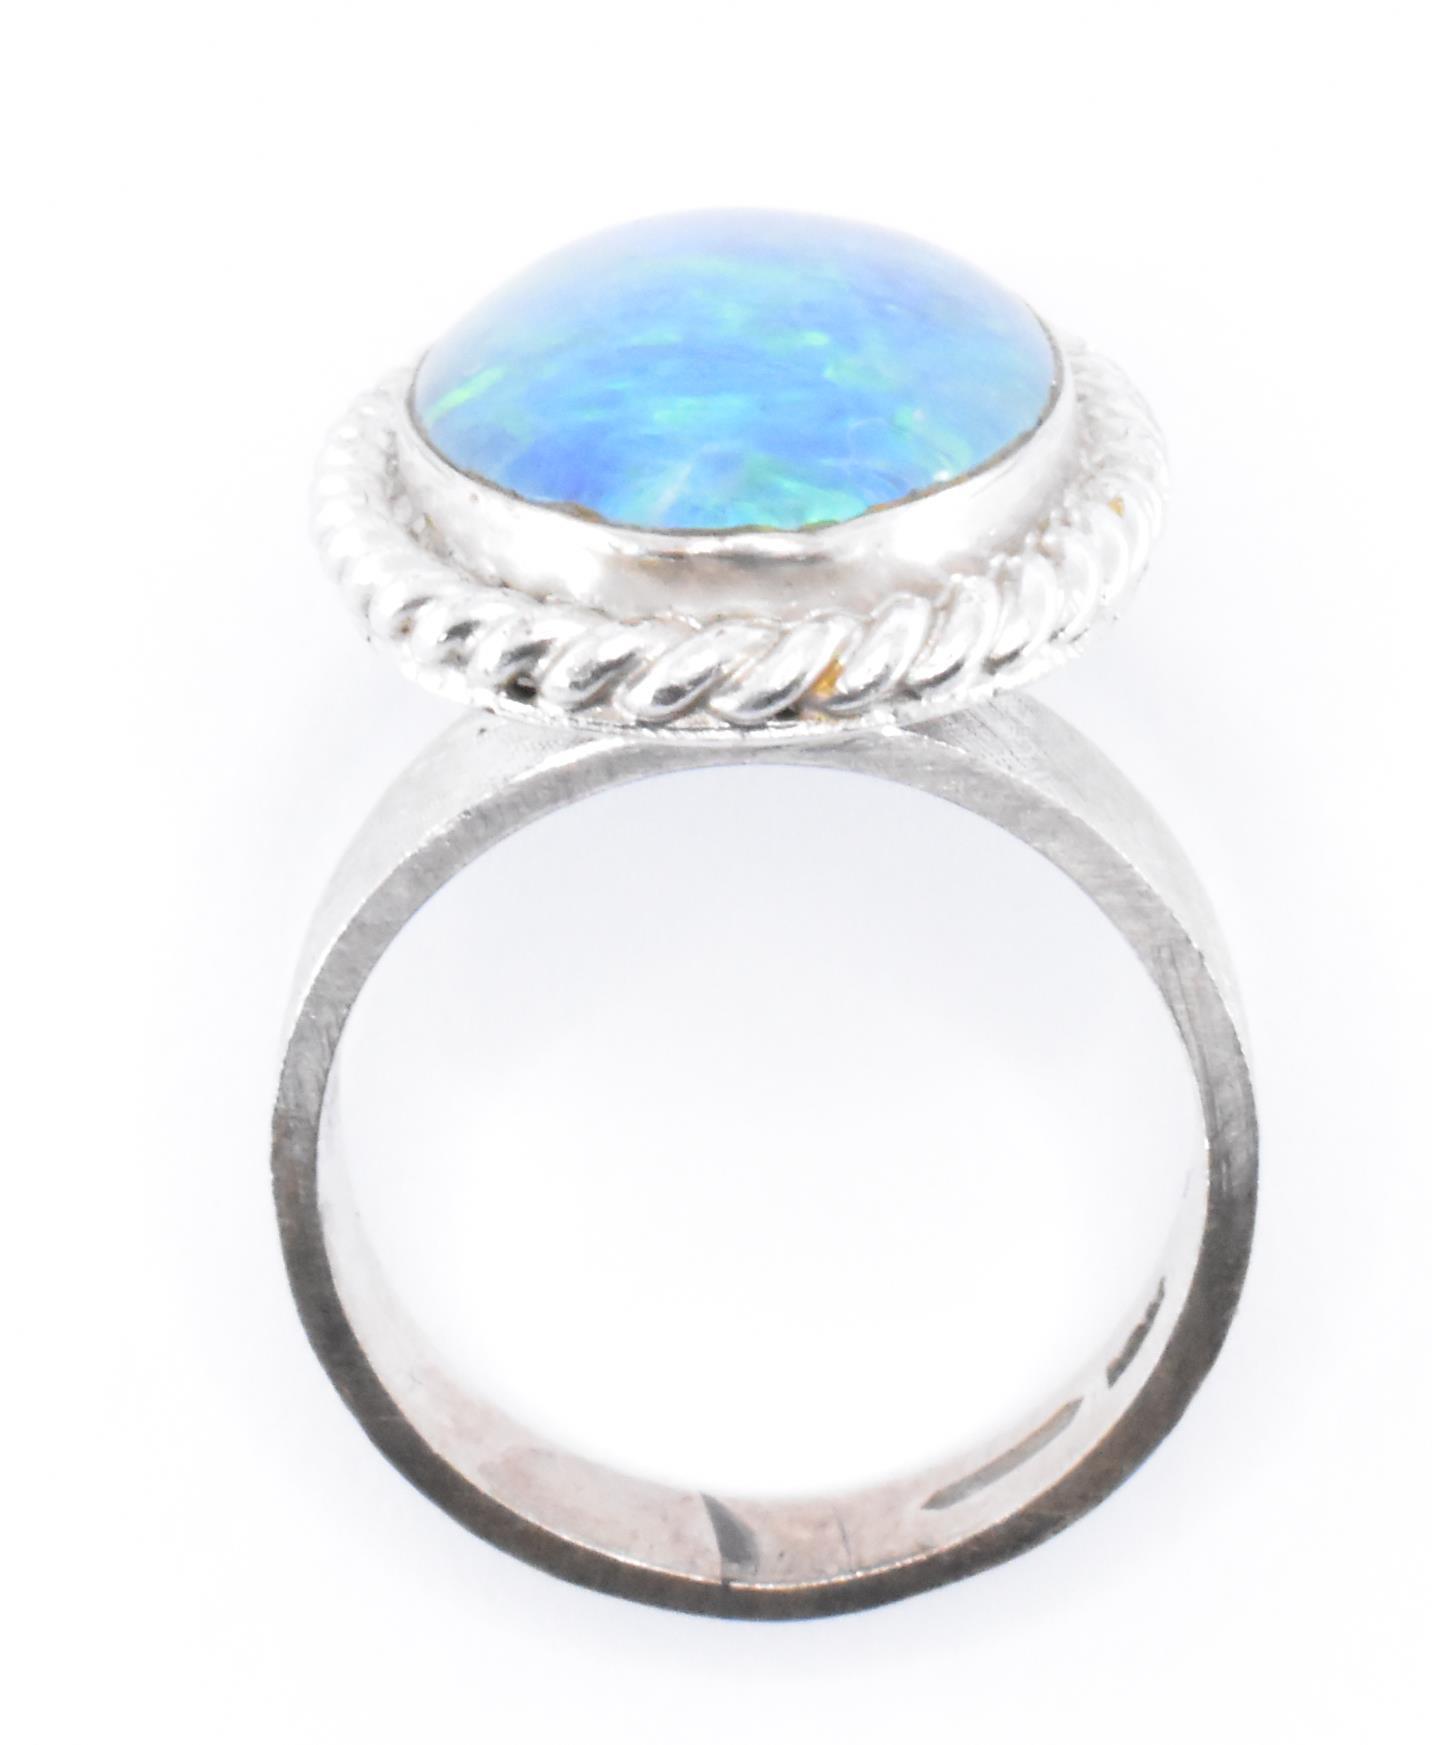 VINTAGE RETRO OPAL DOUBLET RING - Image 6 of 6